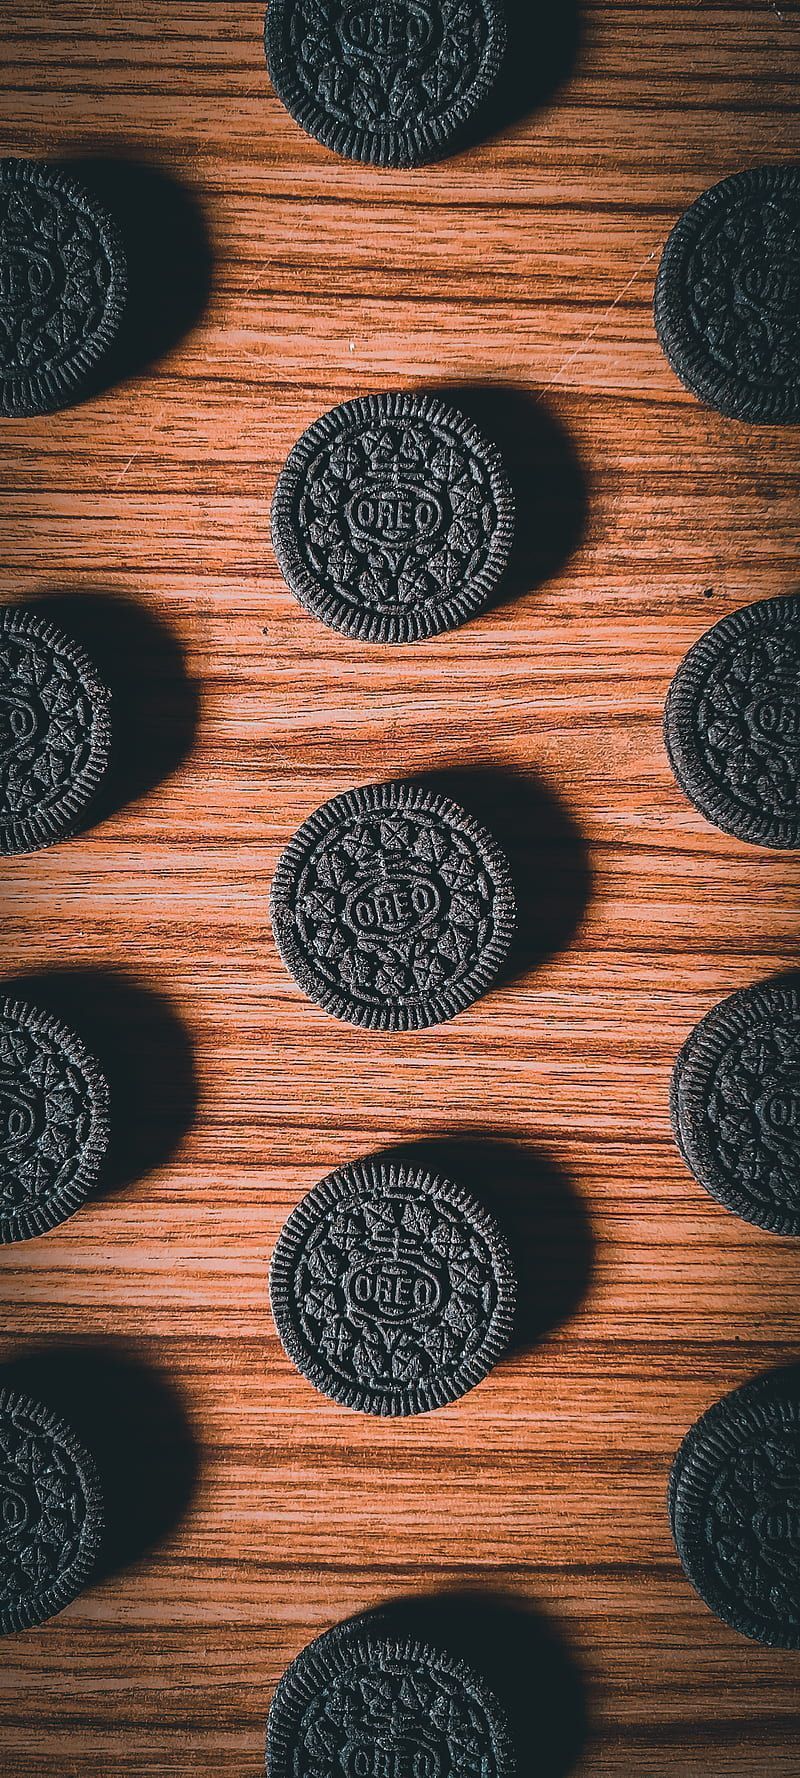 Oreo cookies on a wooden table - Oreo